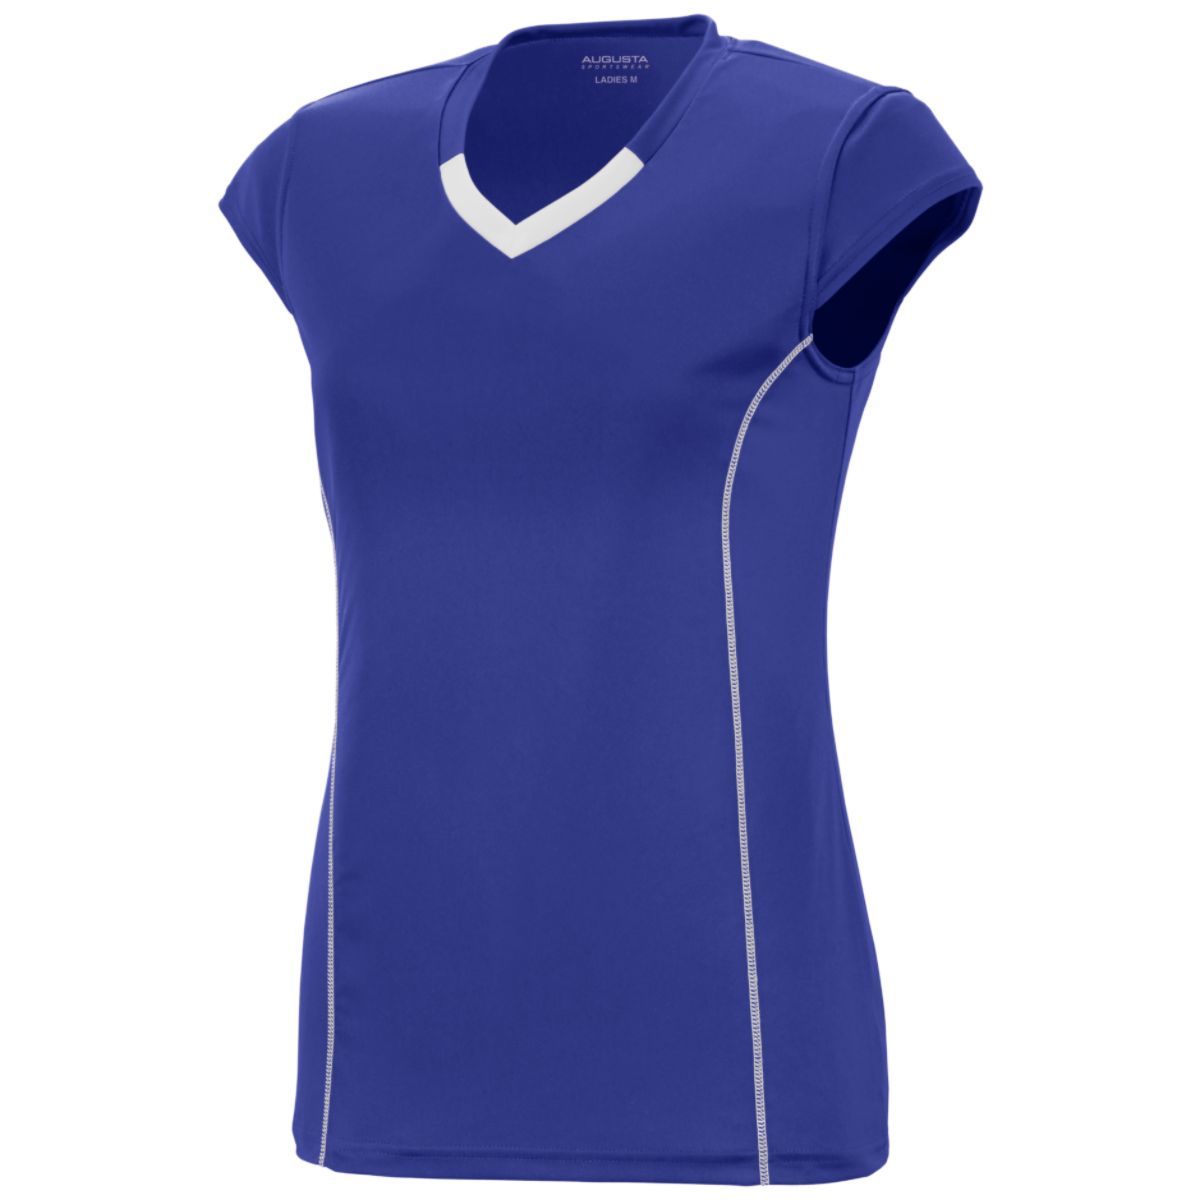 Augusta Sportswear Girls Blash Jersey in Purple/White  -Part of the Girls, Augusta-Products, Volleyball, Girls-Jersey, Shirts product lines at KanaleyCreations.com